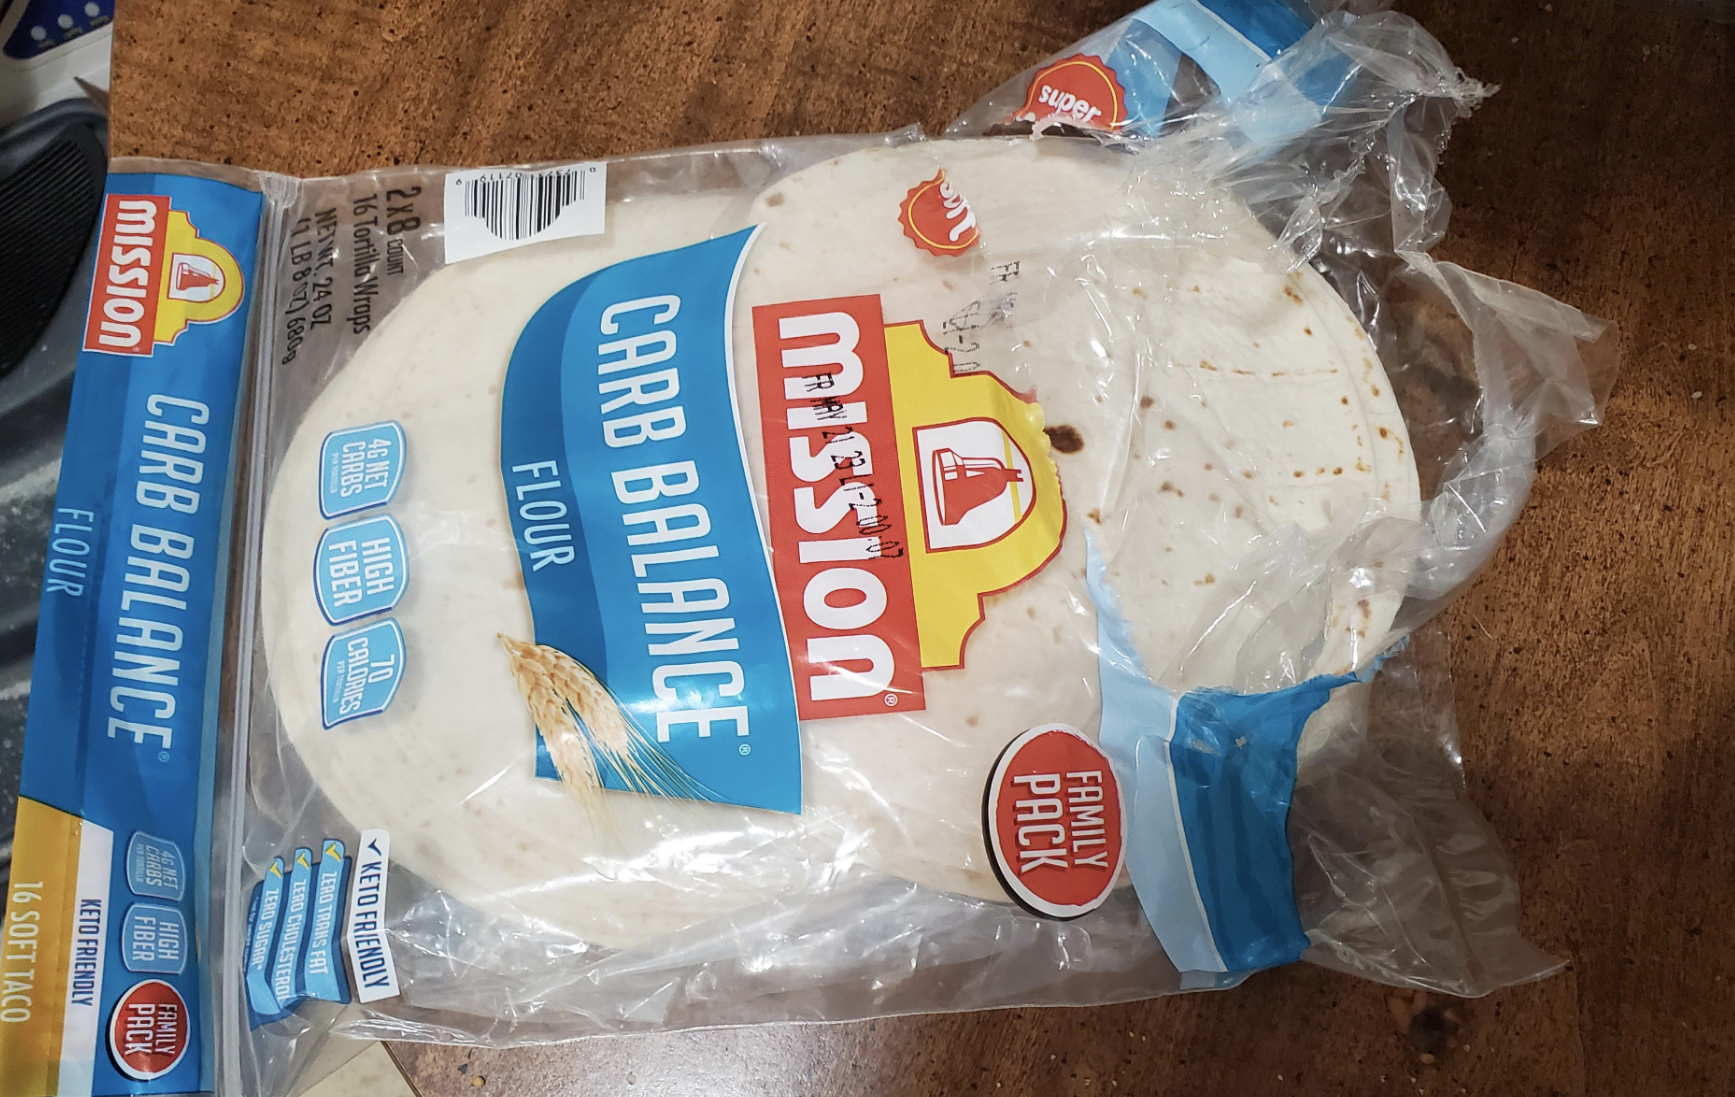 A tortilla package ripped open incorrectly